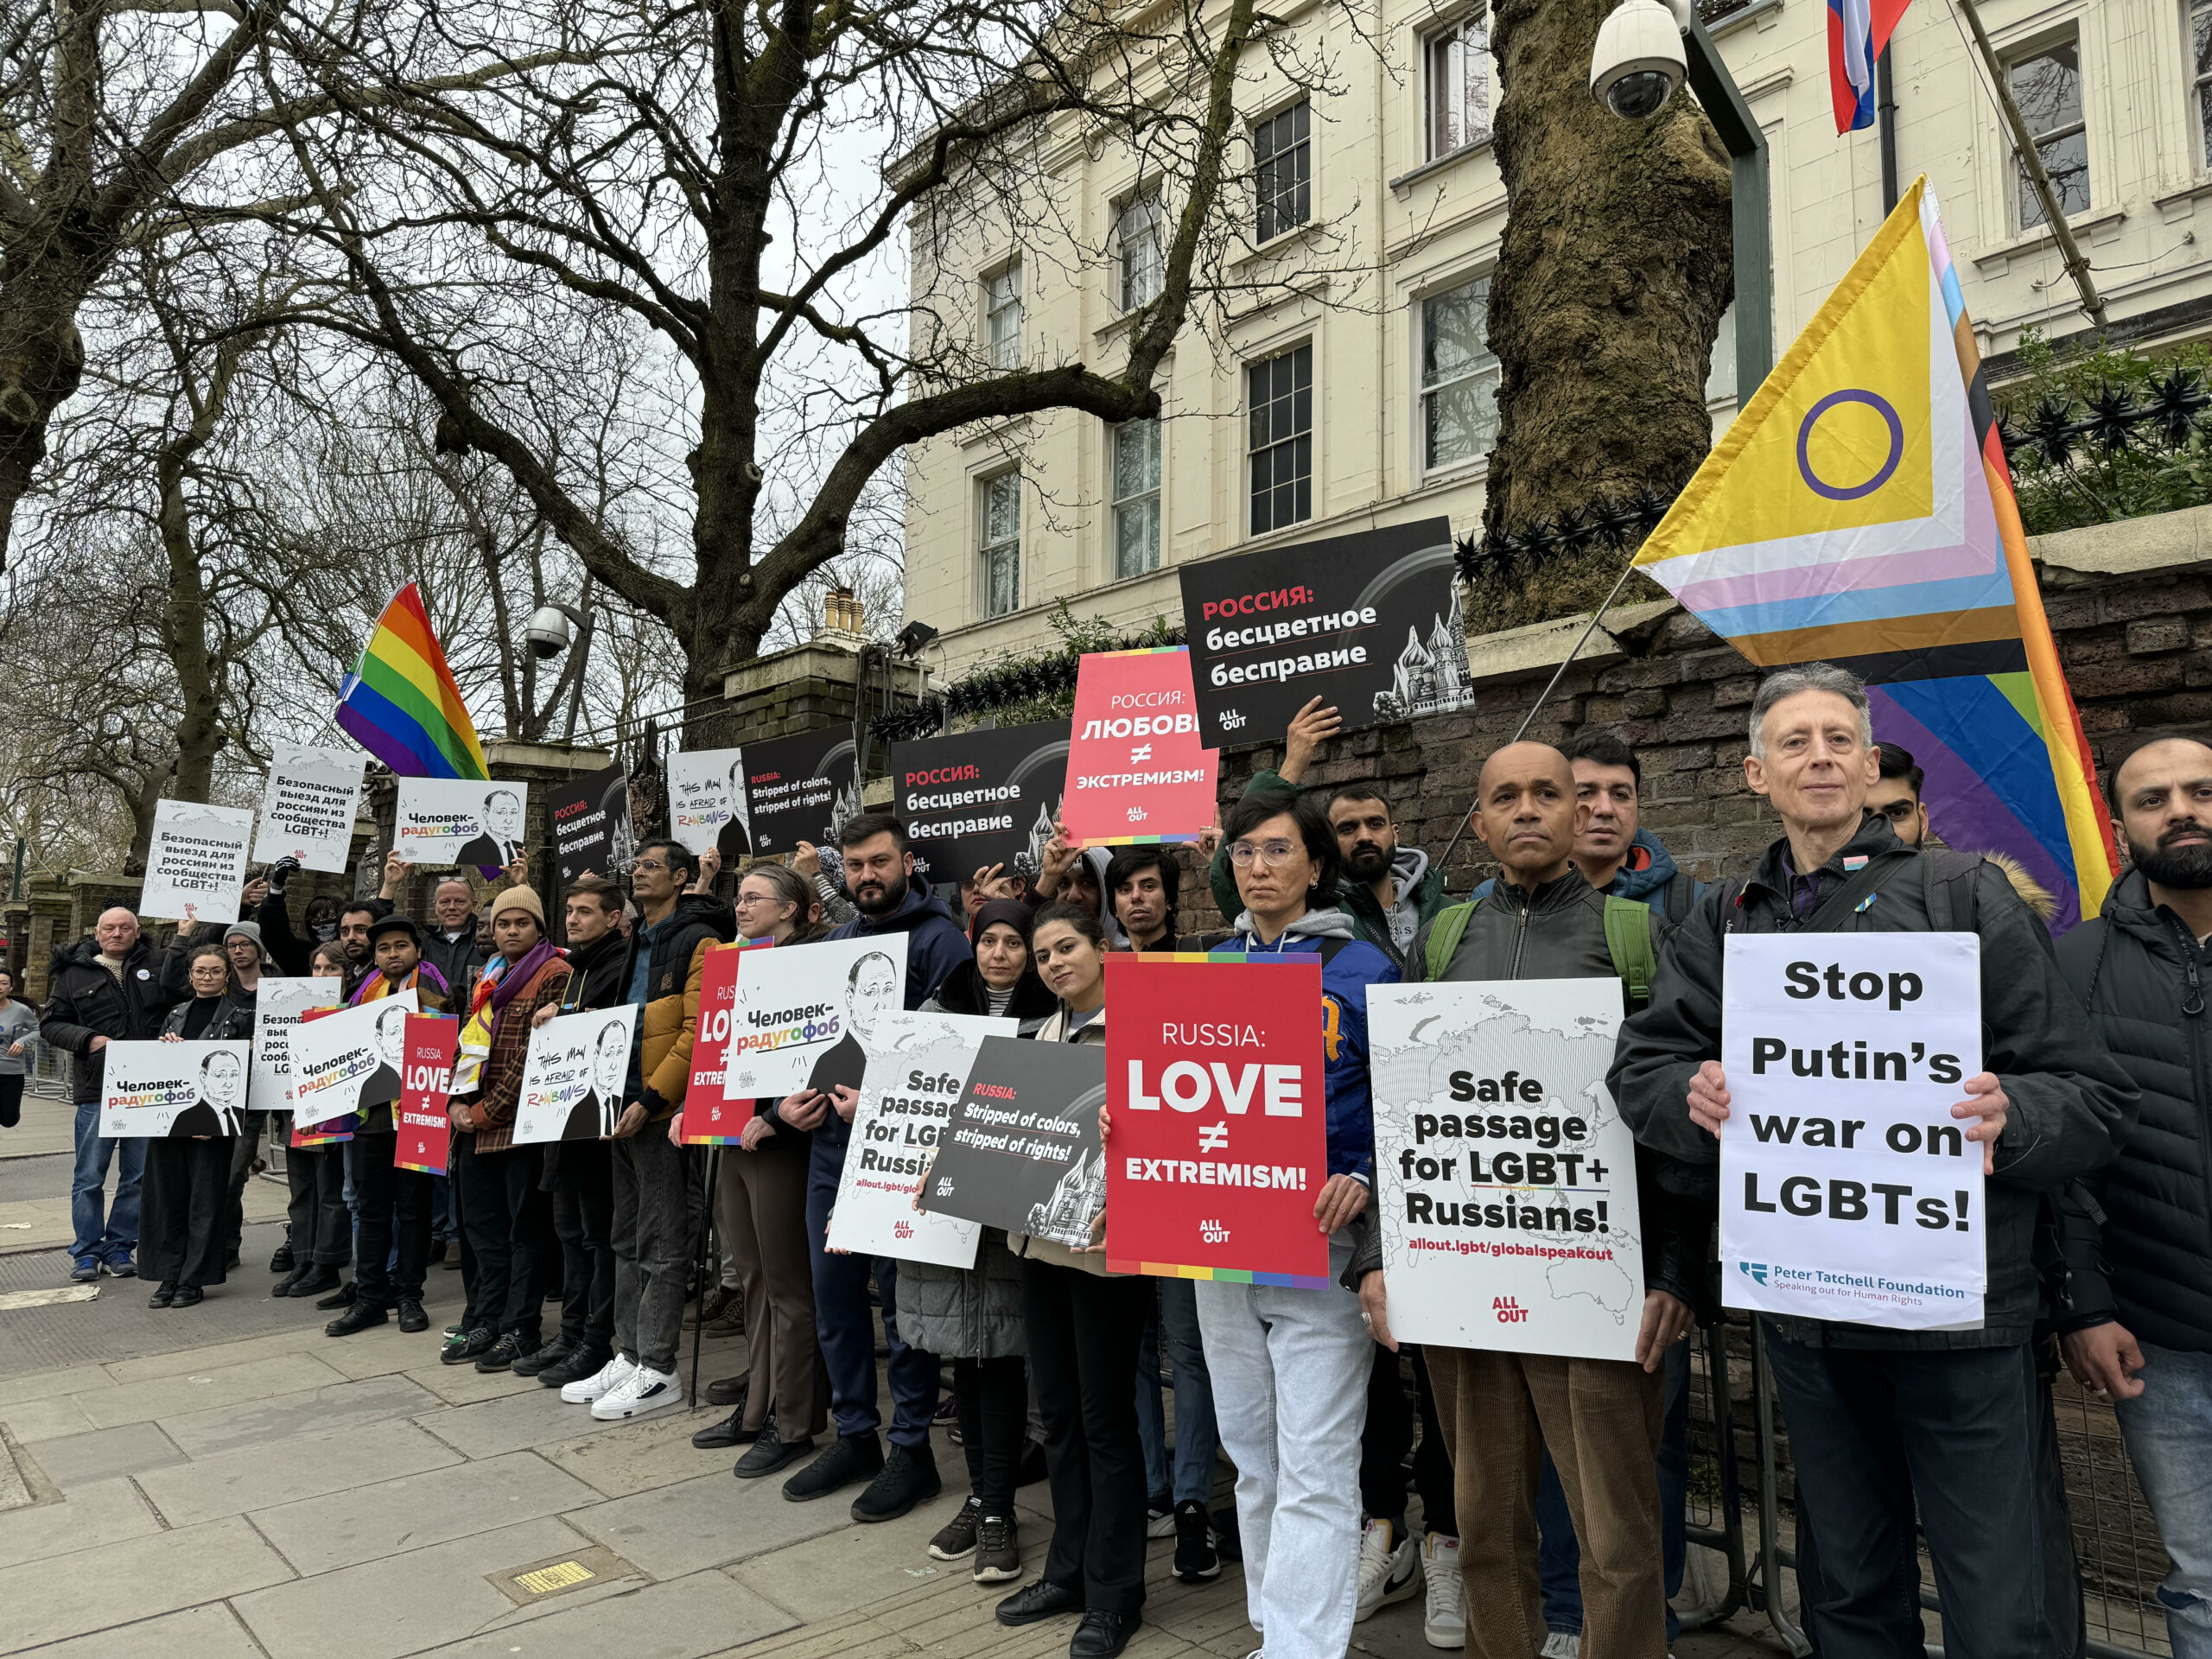 Speak Out: protest at Russian Embassy in London against Putin’s increasing persecution of LGBTQ+ communities